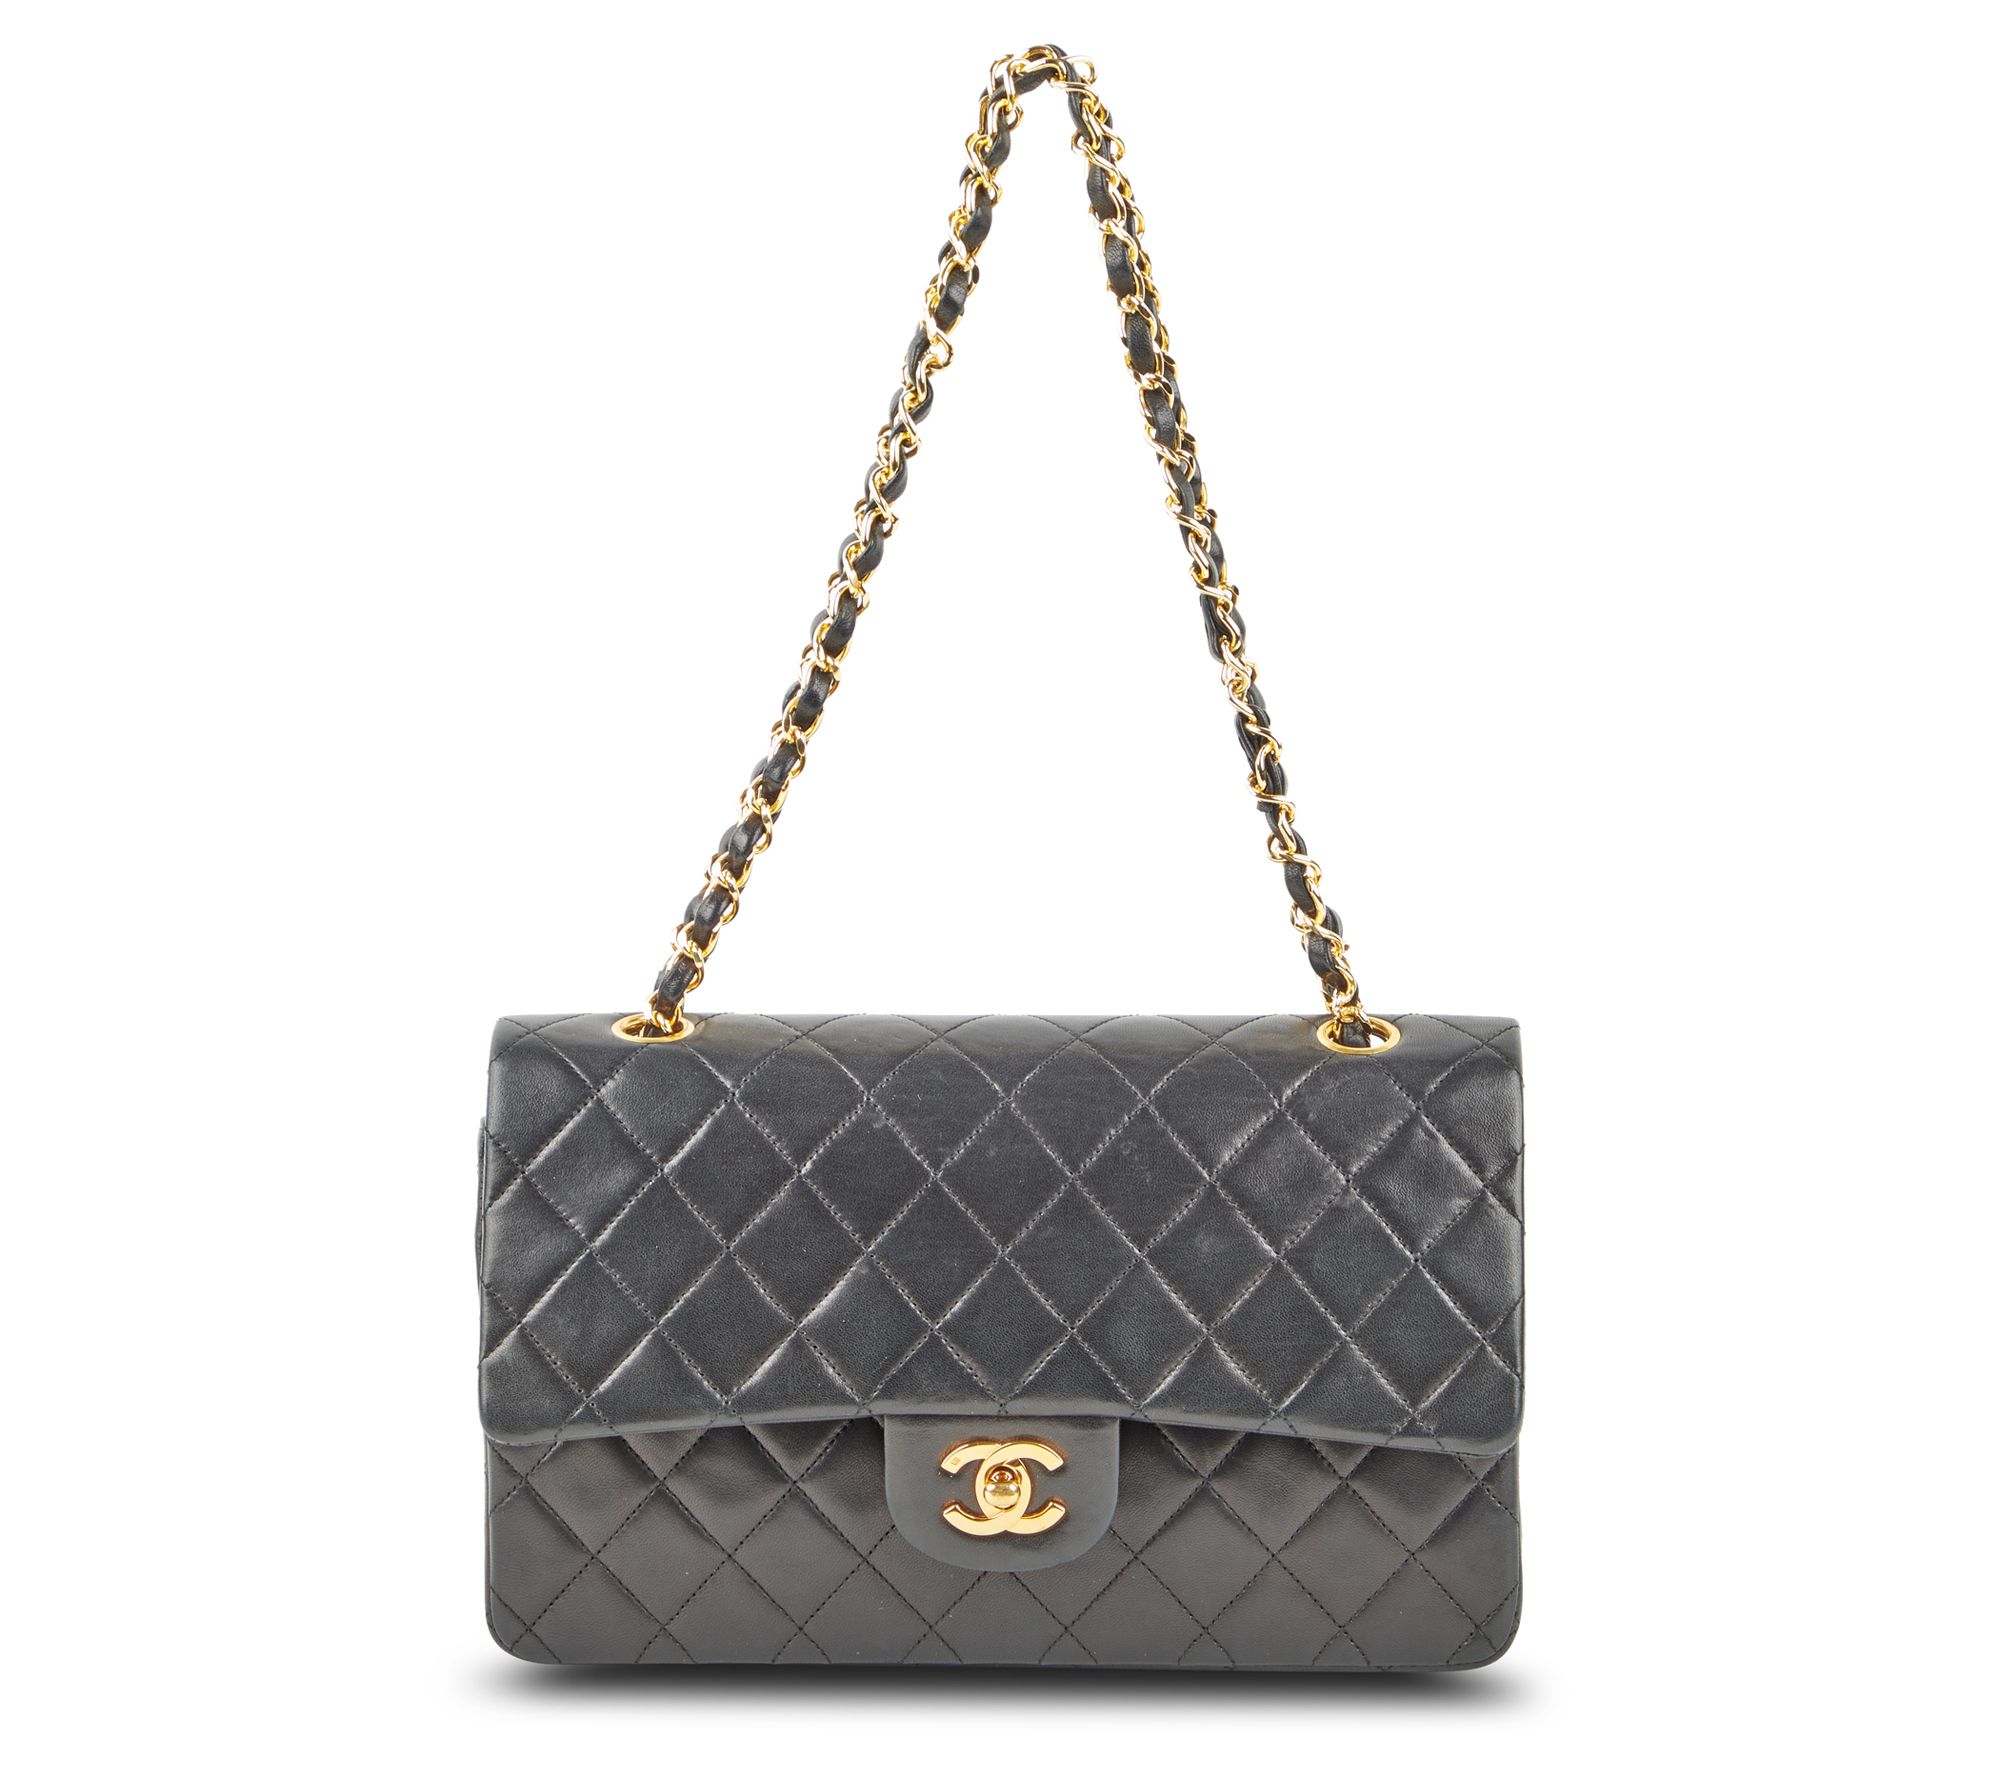 Vintage Chanel small double flap bag - THE HOUSE OF WAUW